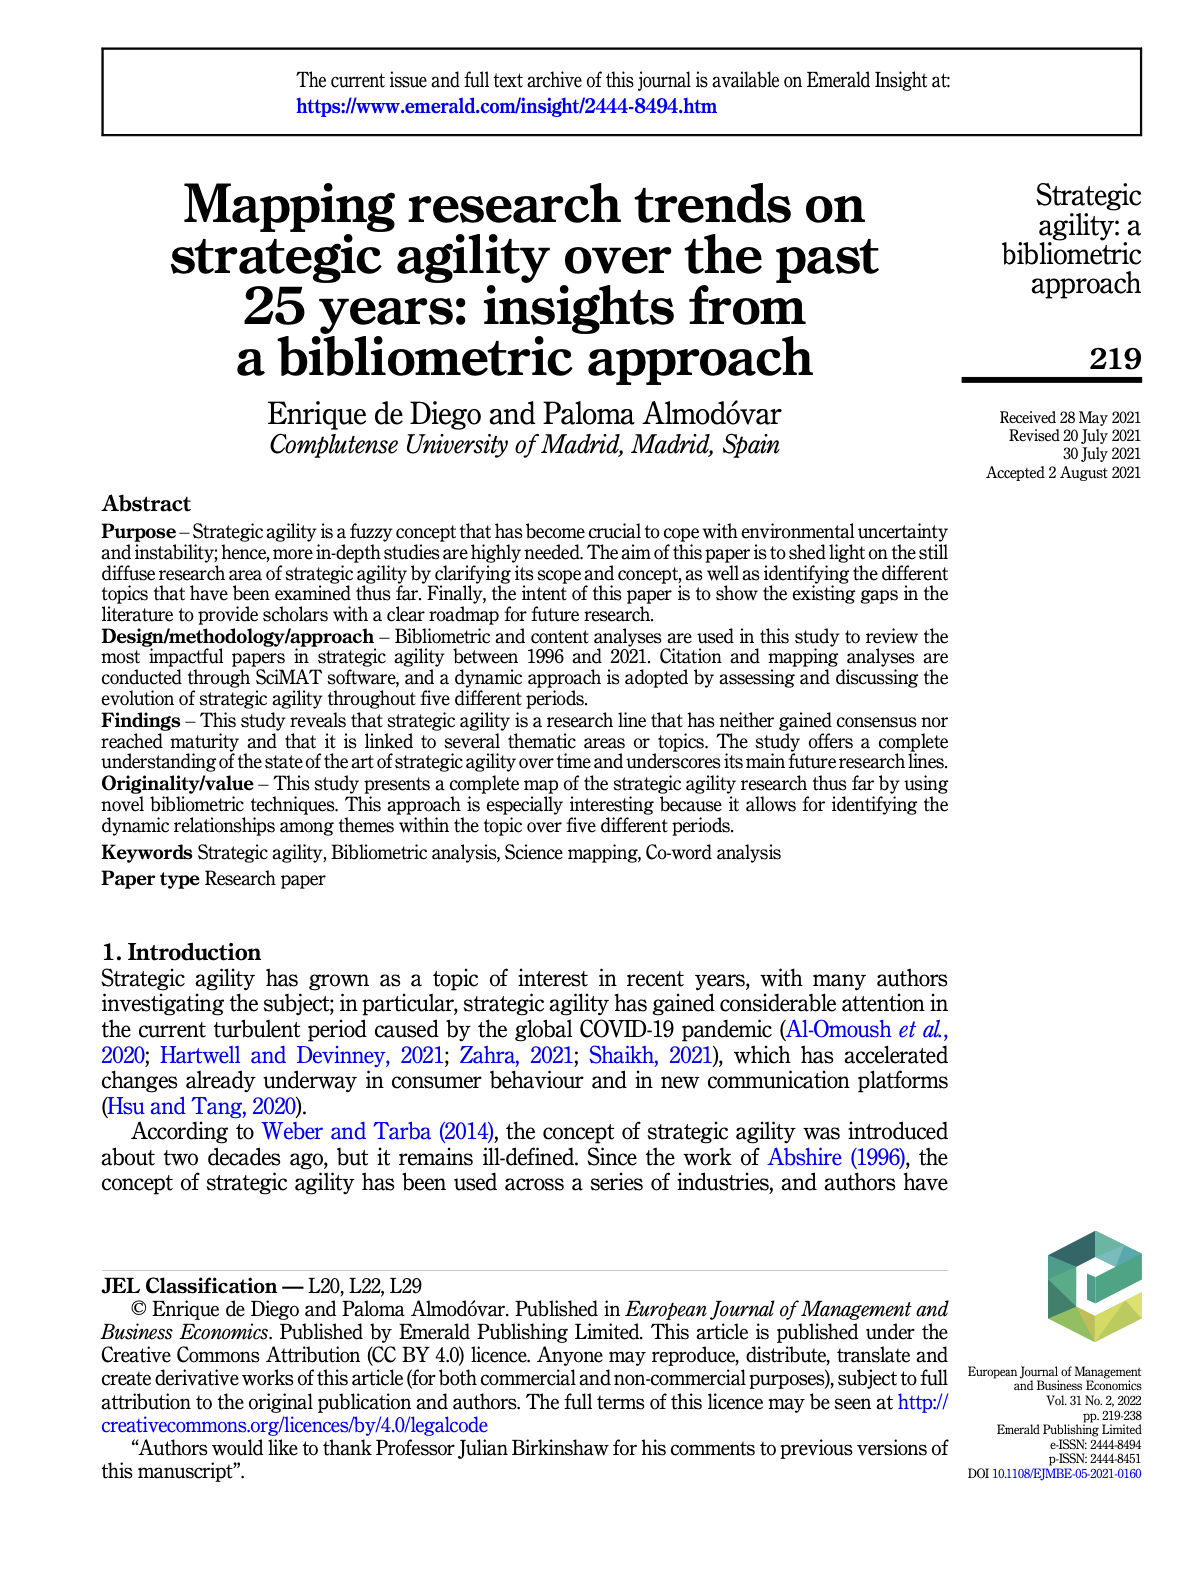 Mapping research trends on strategic agility over the past 25 years: insights from a bibliometric approach